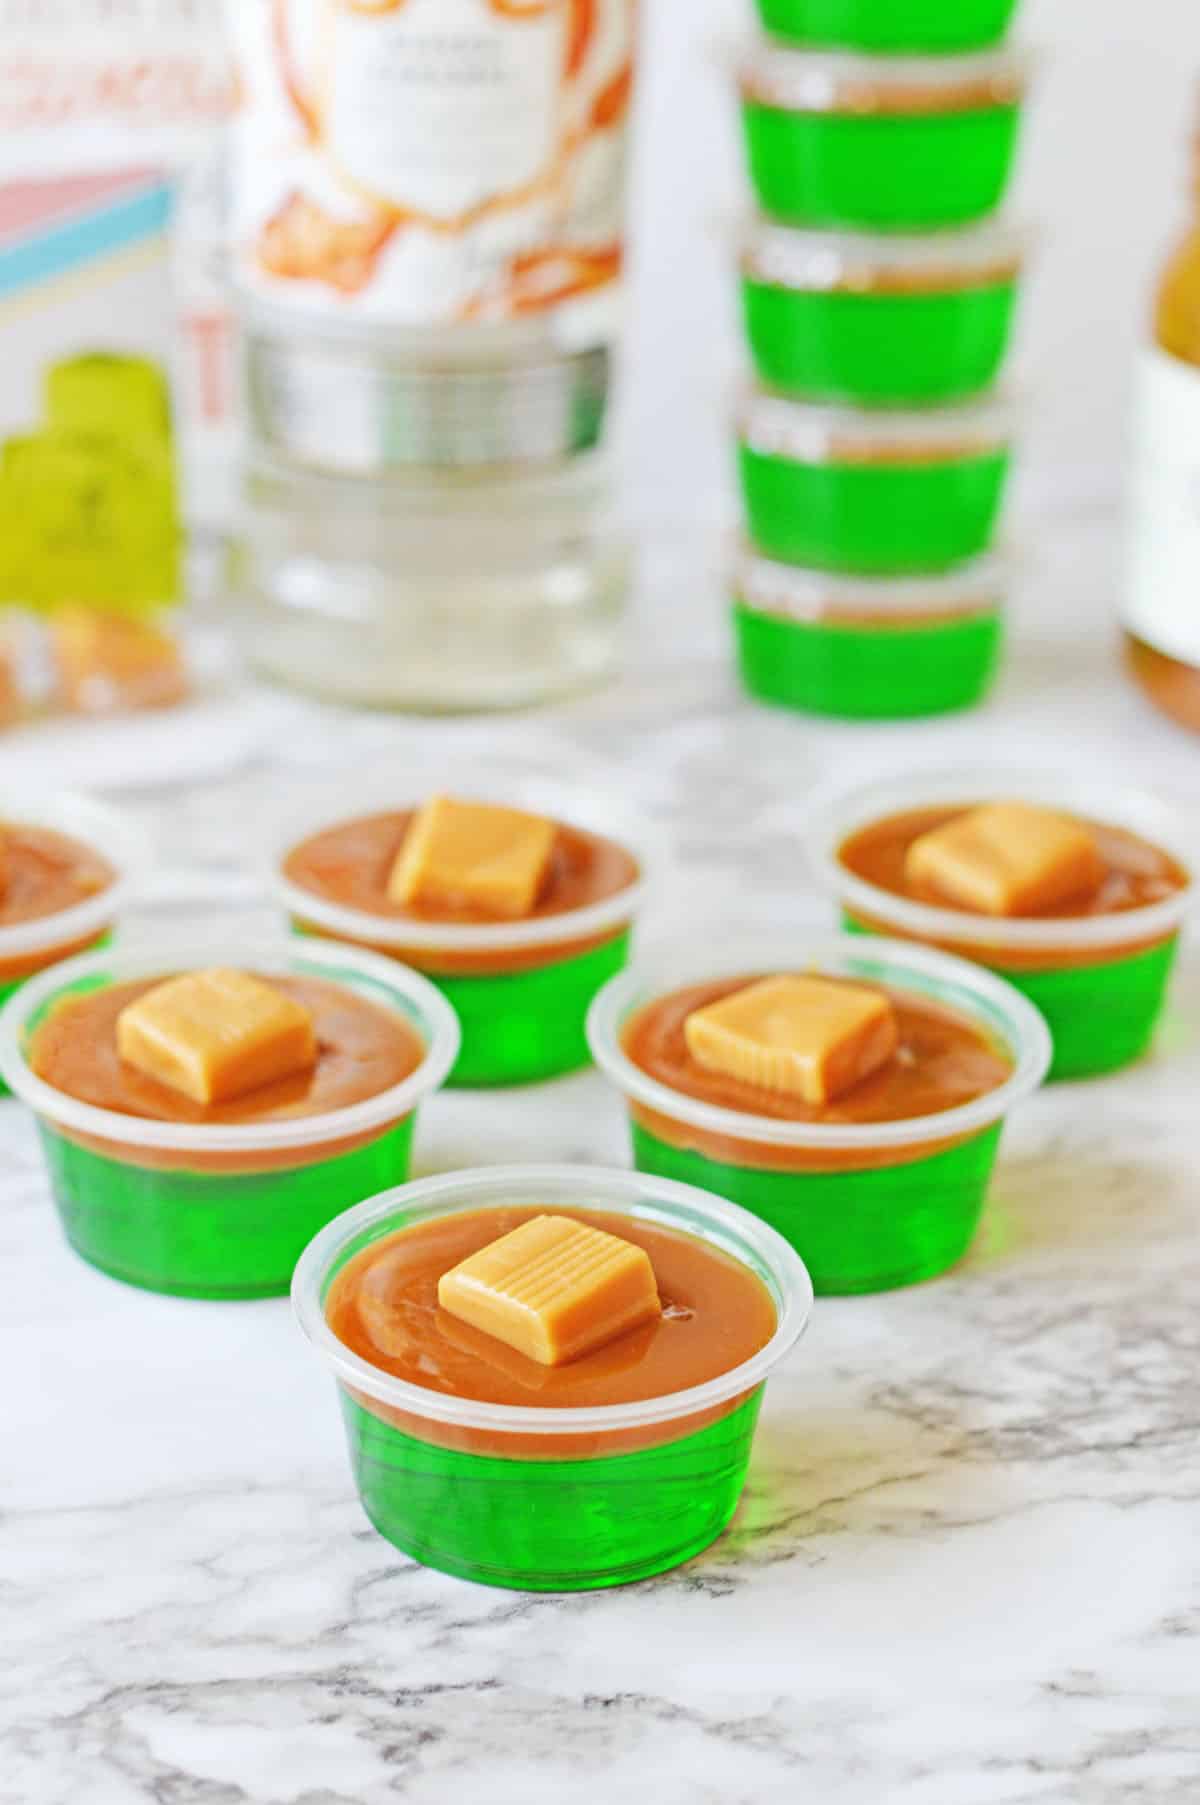 Green jello shots with a layer of caramel and caramel candy on top.